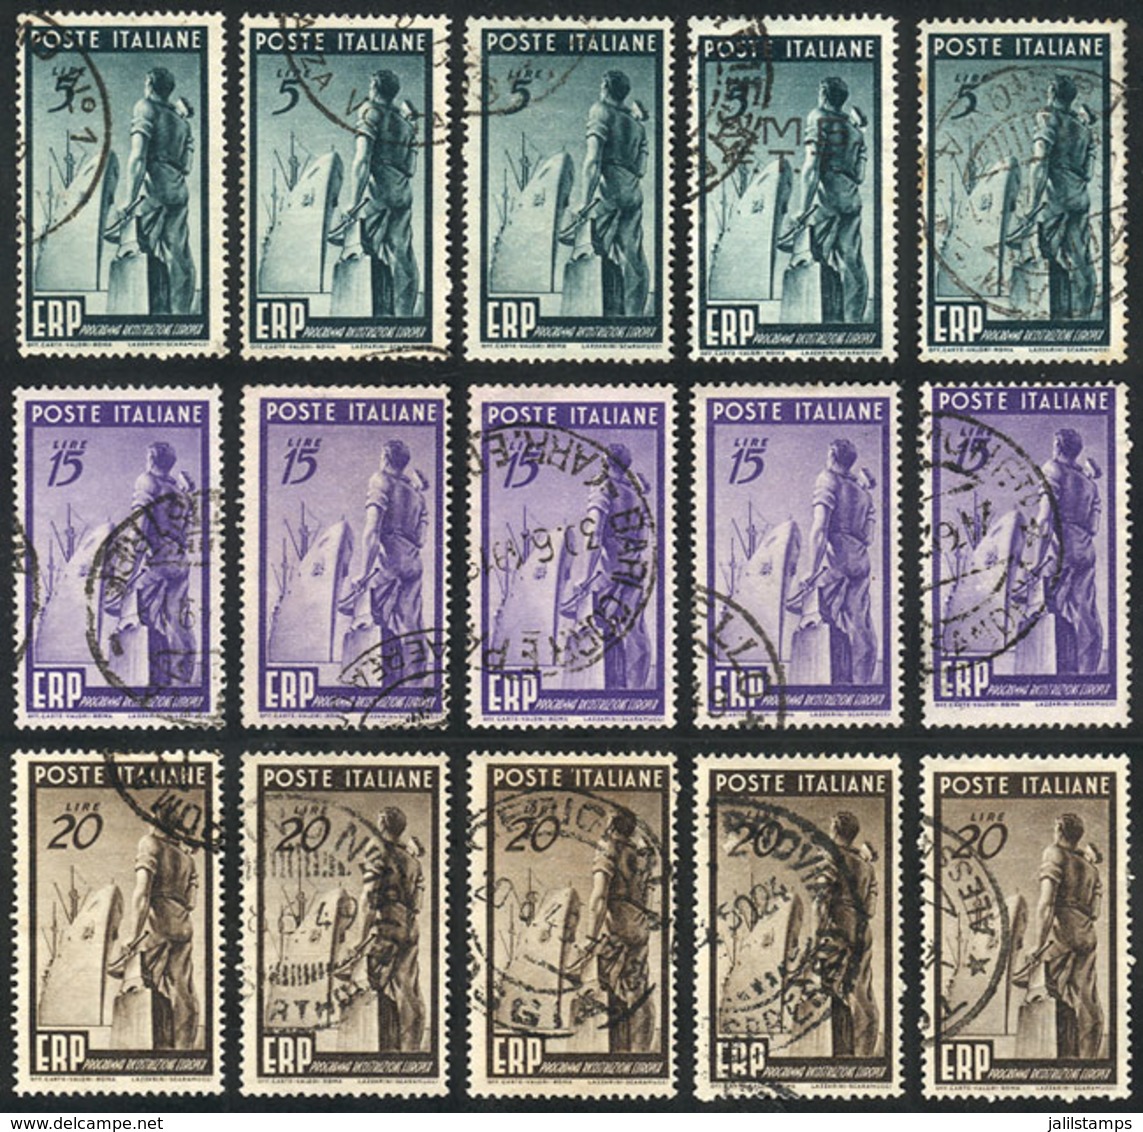 ITALY: Yvert 539/541, 1949 Reconstruction Of Europe, 5 Complete Used Sets, VF Quality, Catalog Value Euros 275 - Unclassified